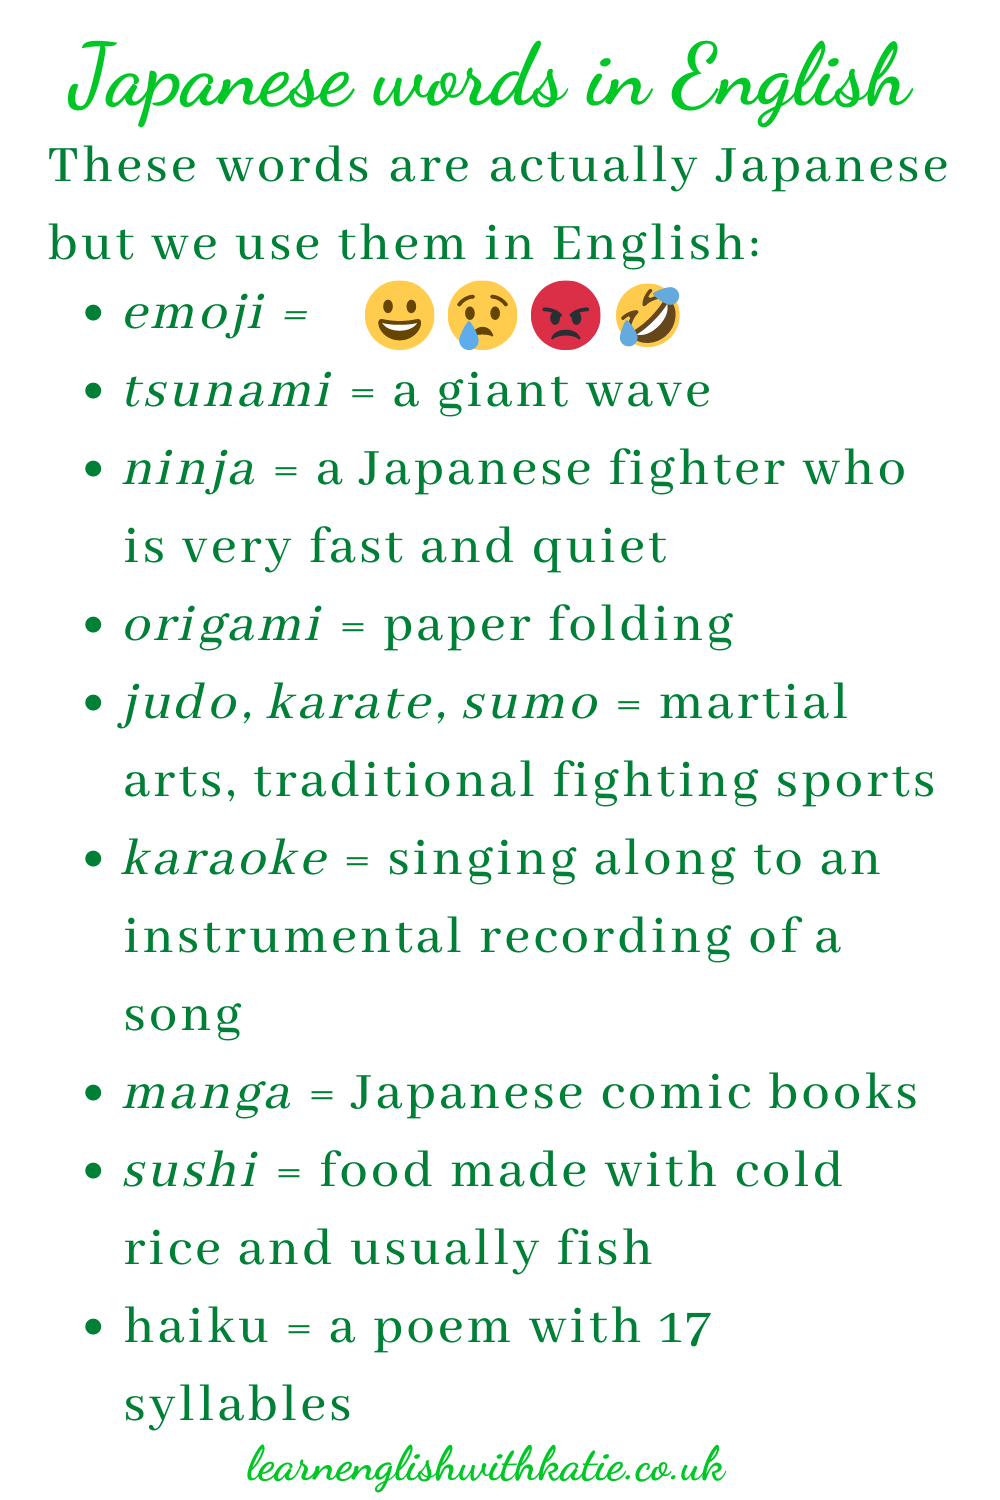 Pinterest pin showing some of the Japanese words from this post.